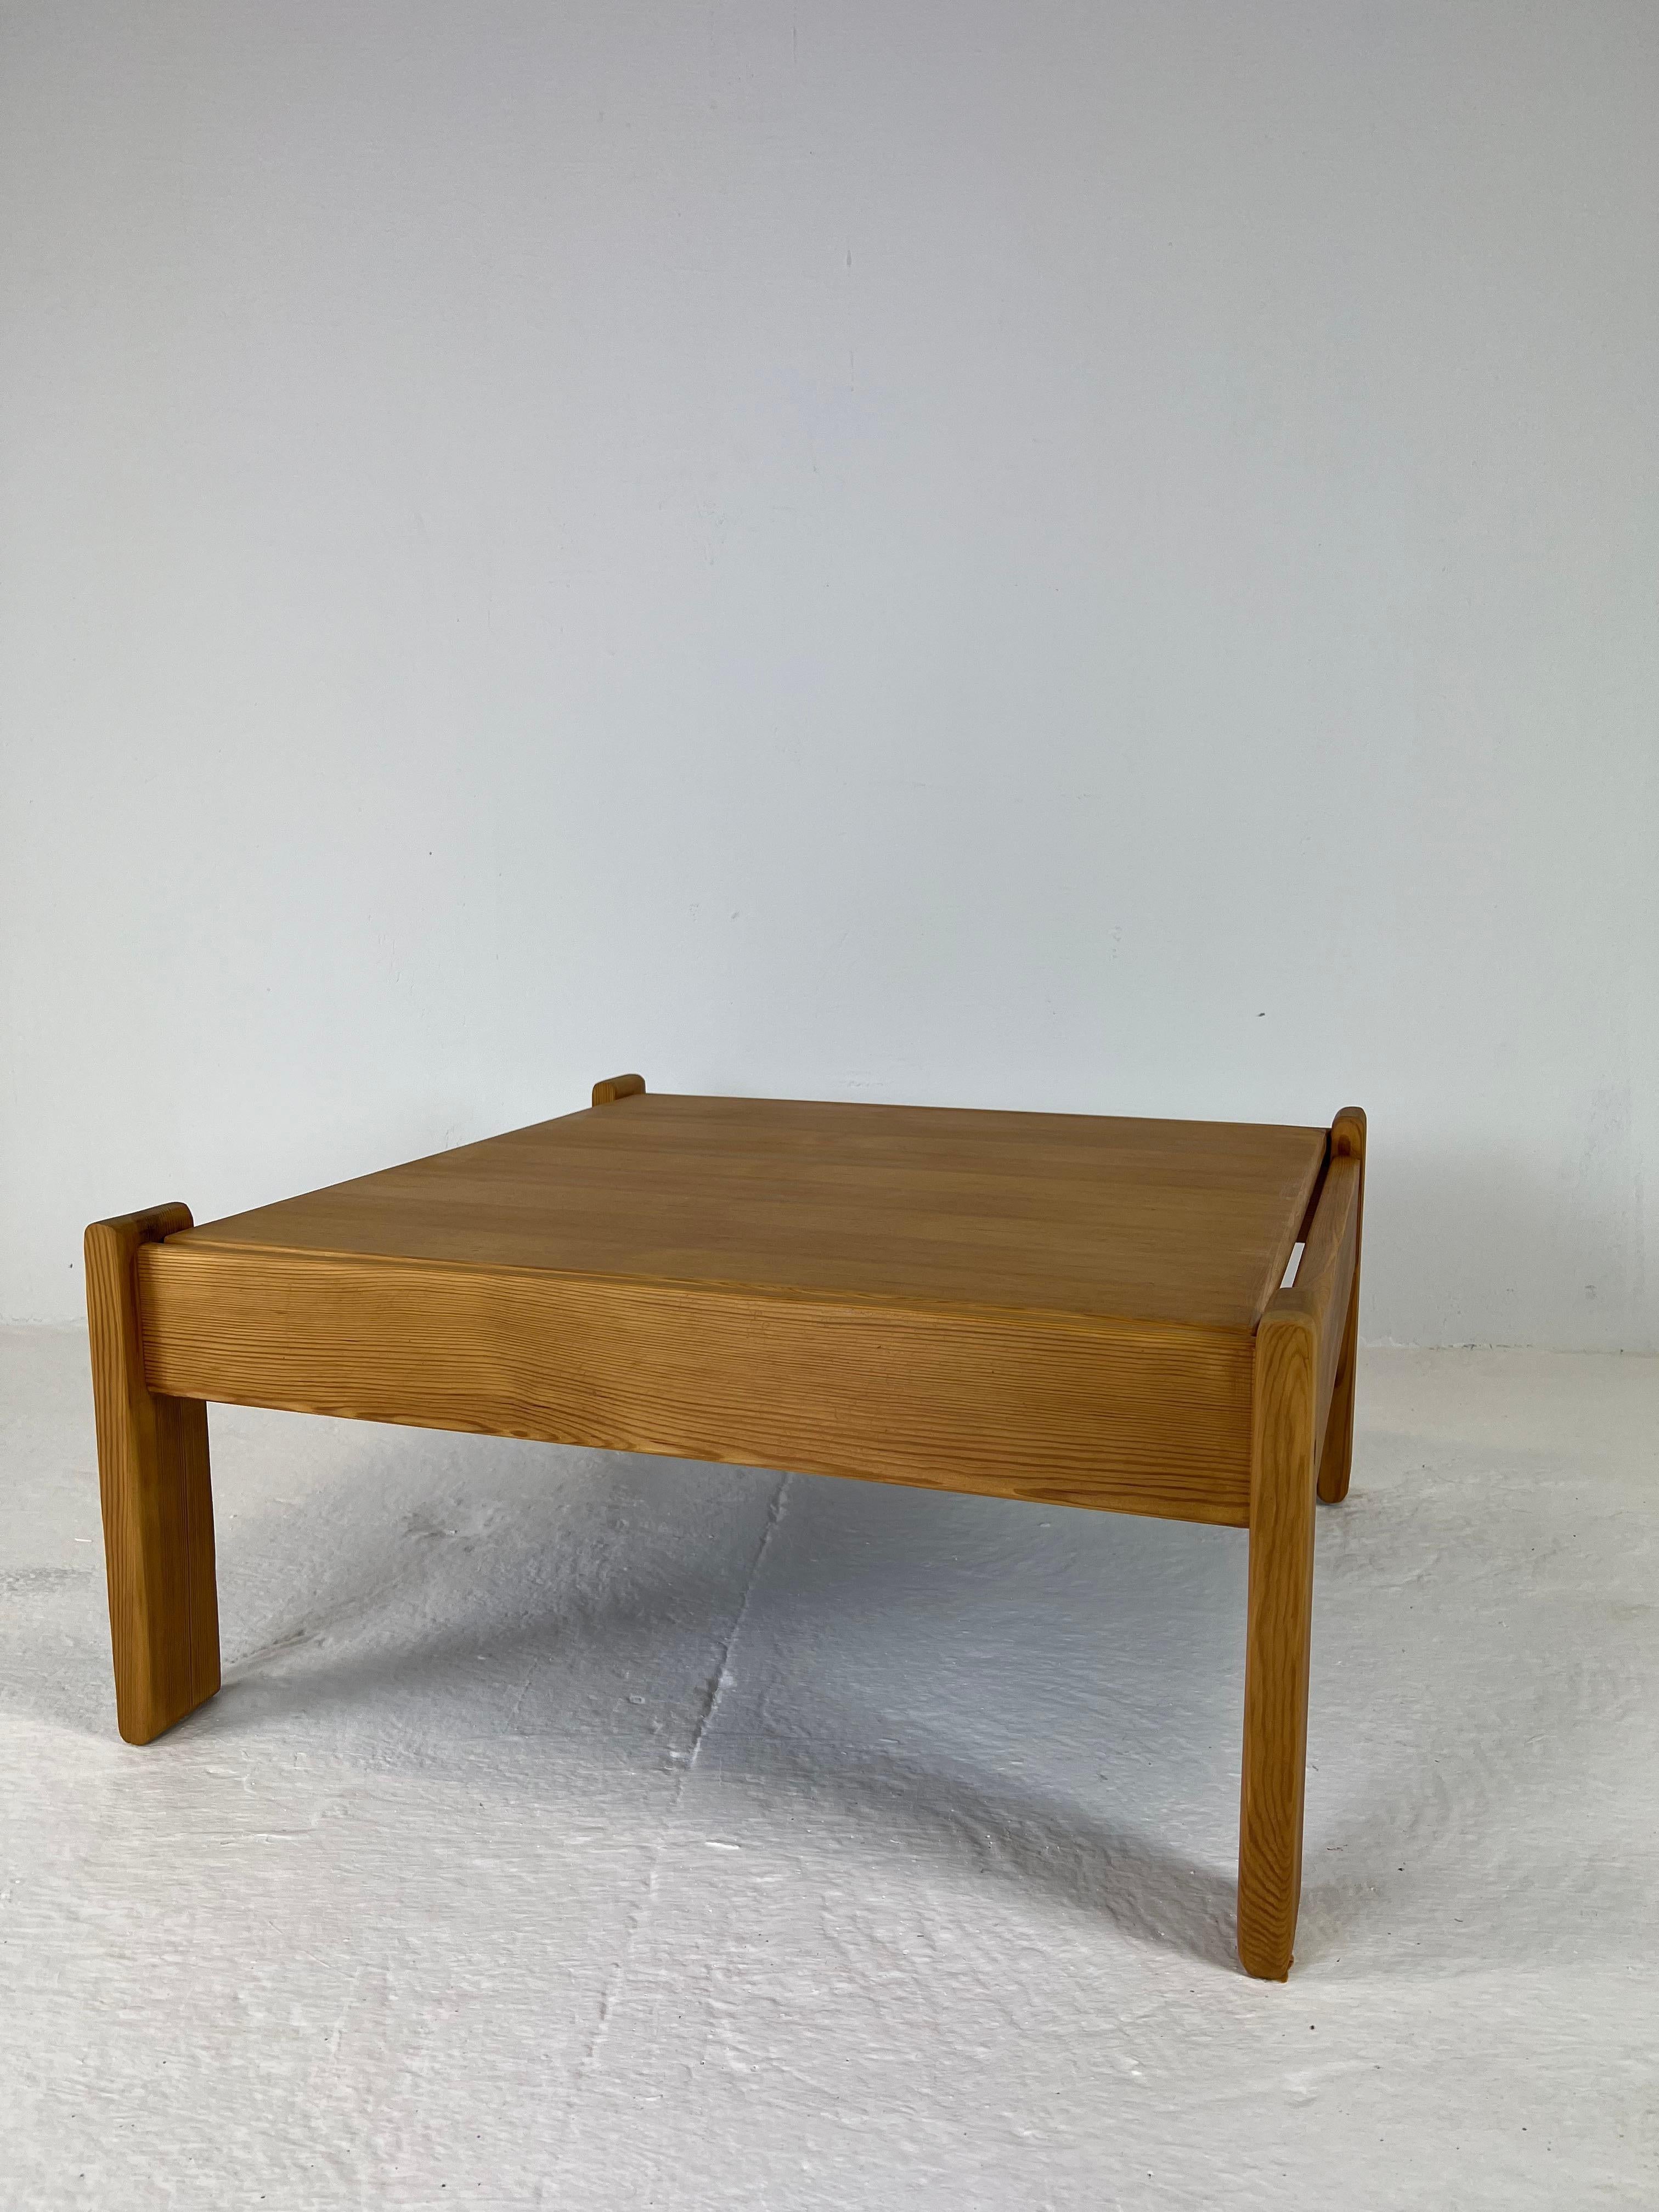 Two-Sided Modernist Coffee Table in Pine Wood, 1970s For Sale 9